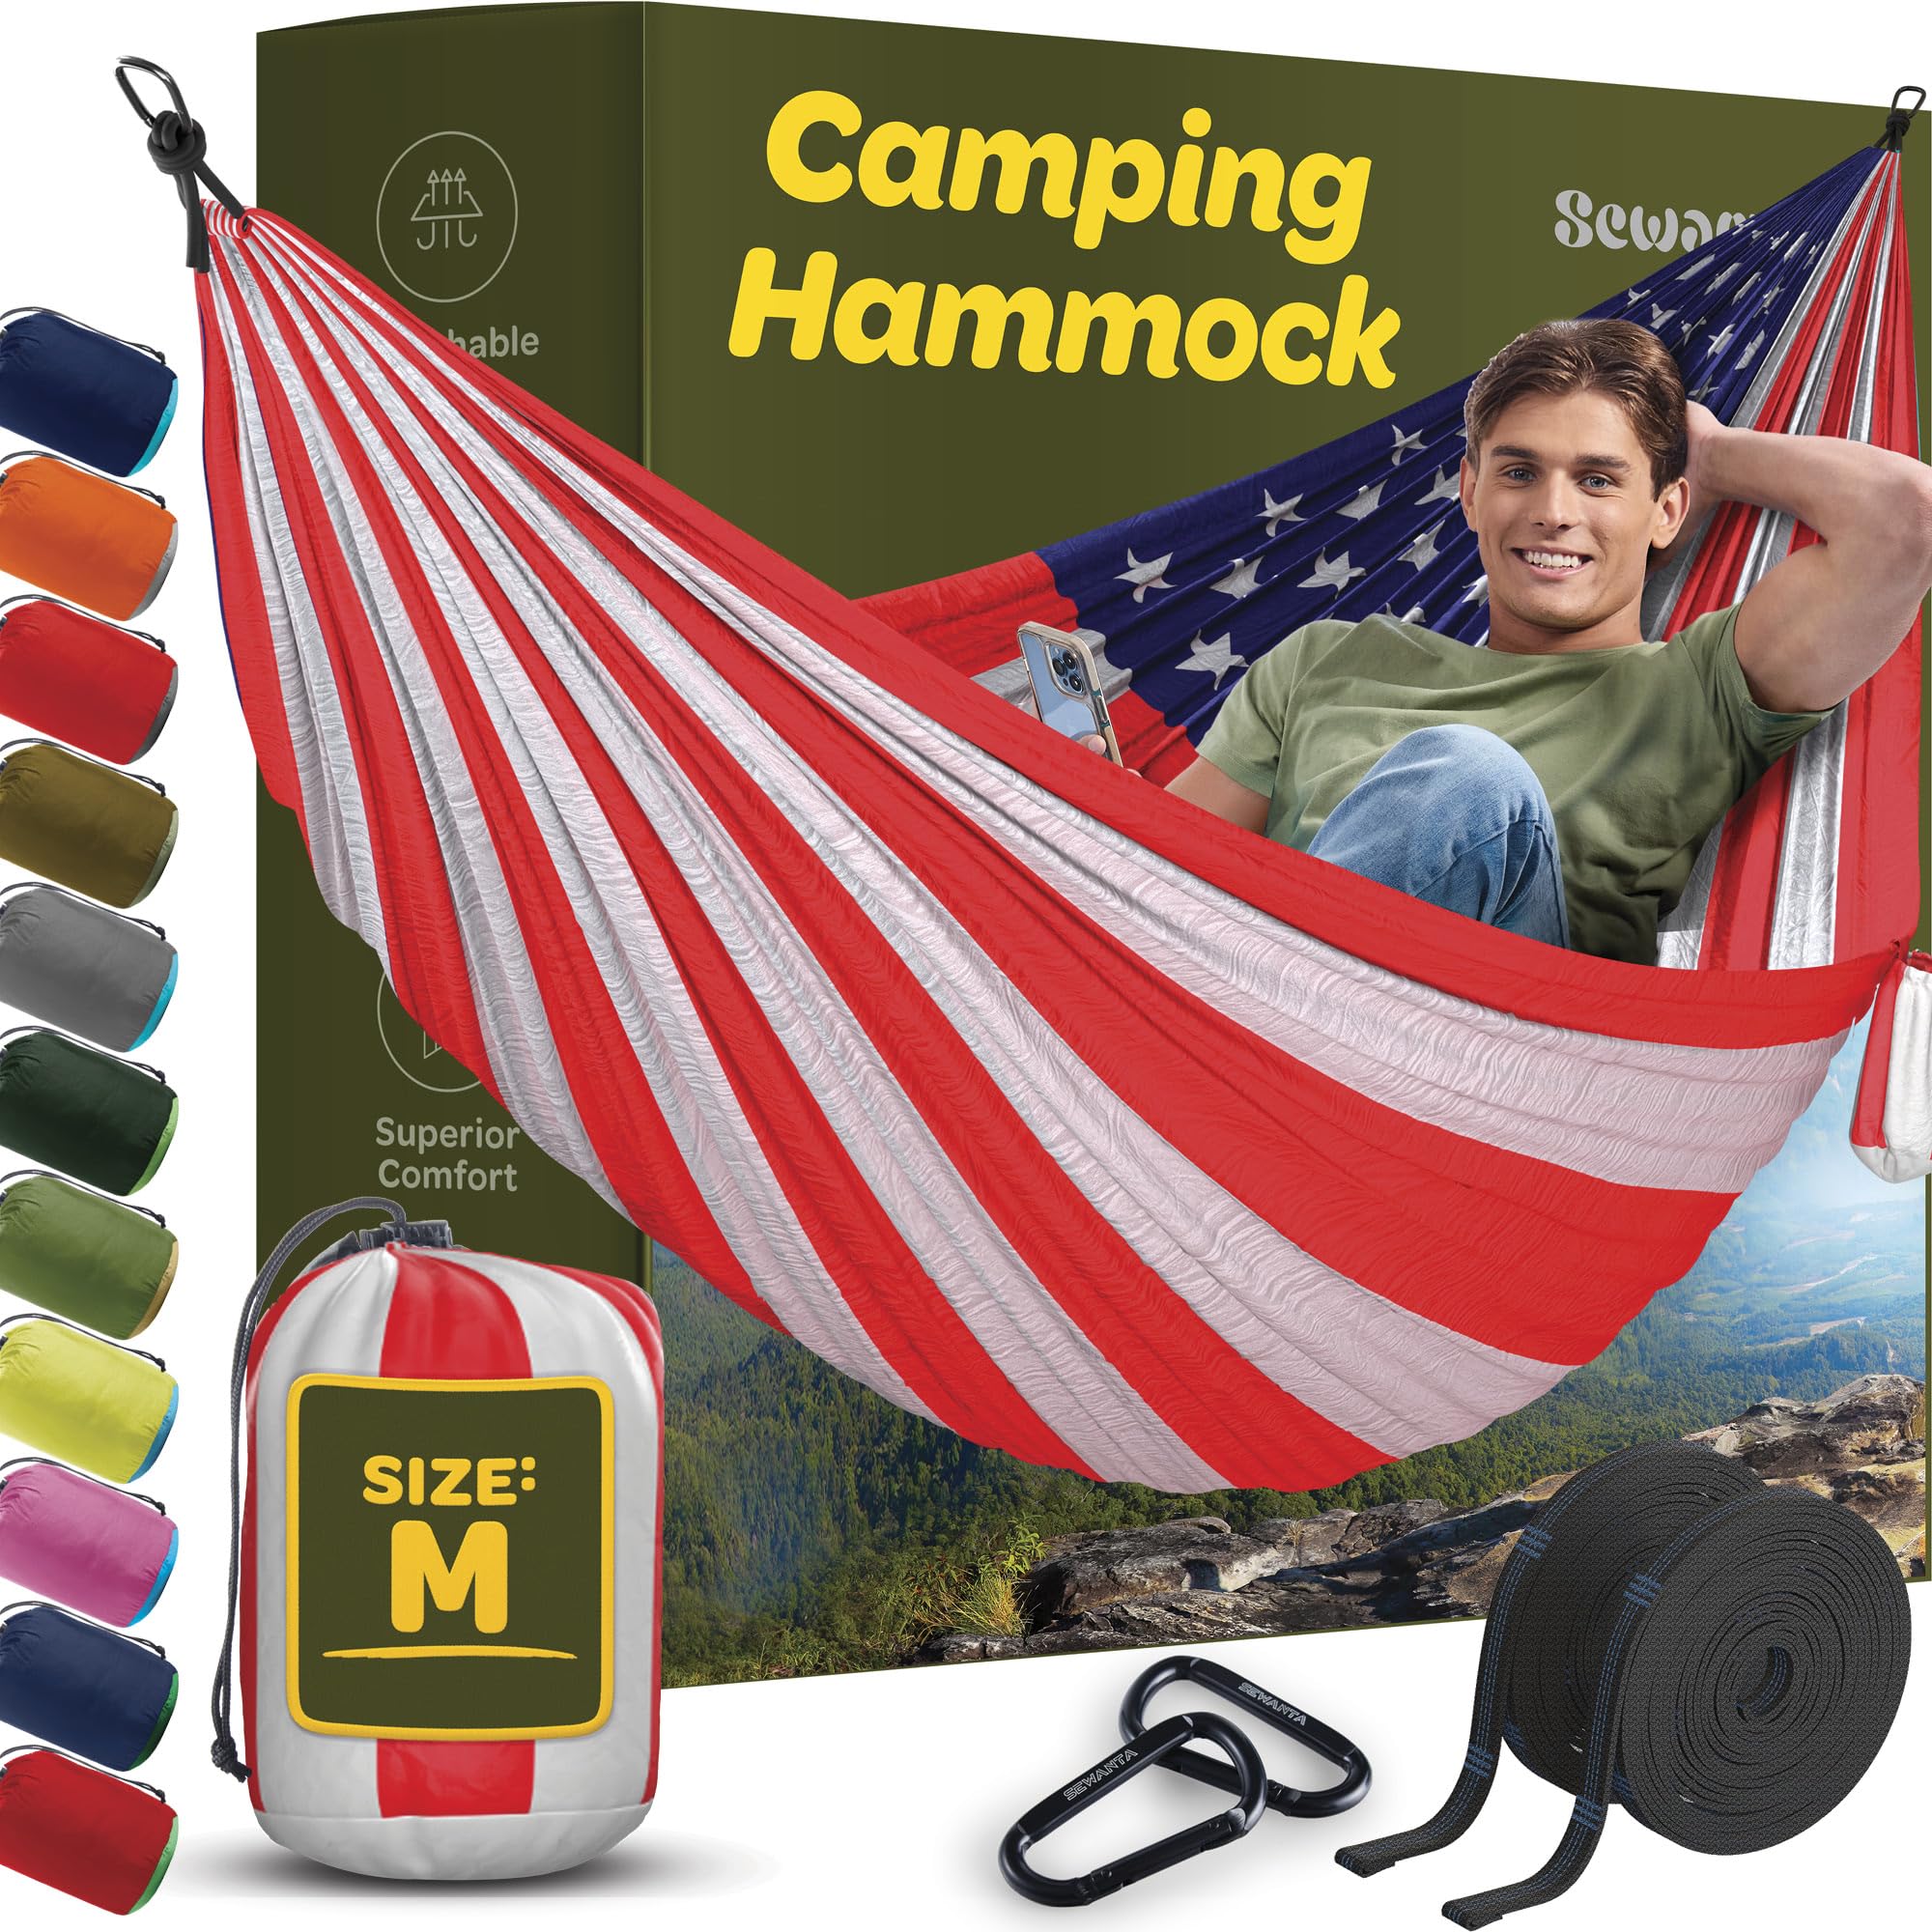 Durable Hammock 500 lb Capacity - Lightweight Nylon Camping Hammock Chair - Double or Single Sizes w/Tree Straps and Attached Carry Bag - Portable for Travel/Backpacking  - Good